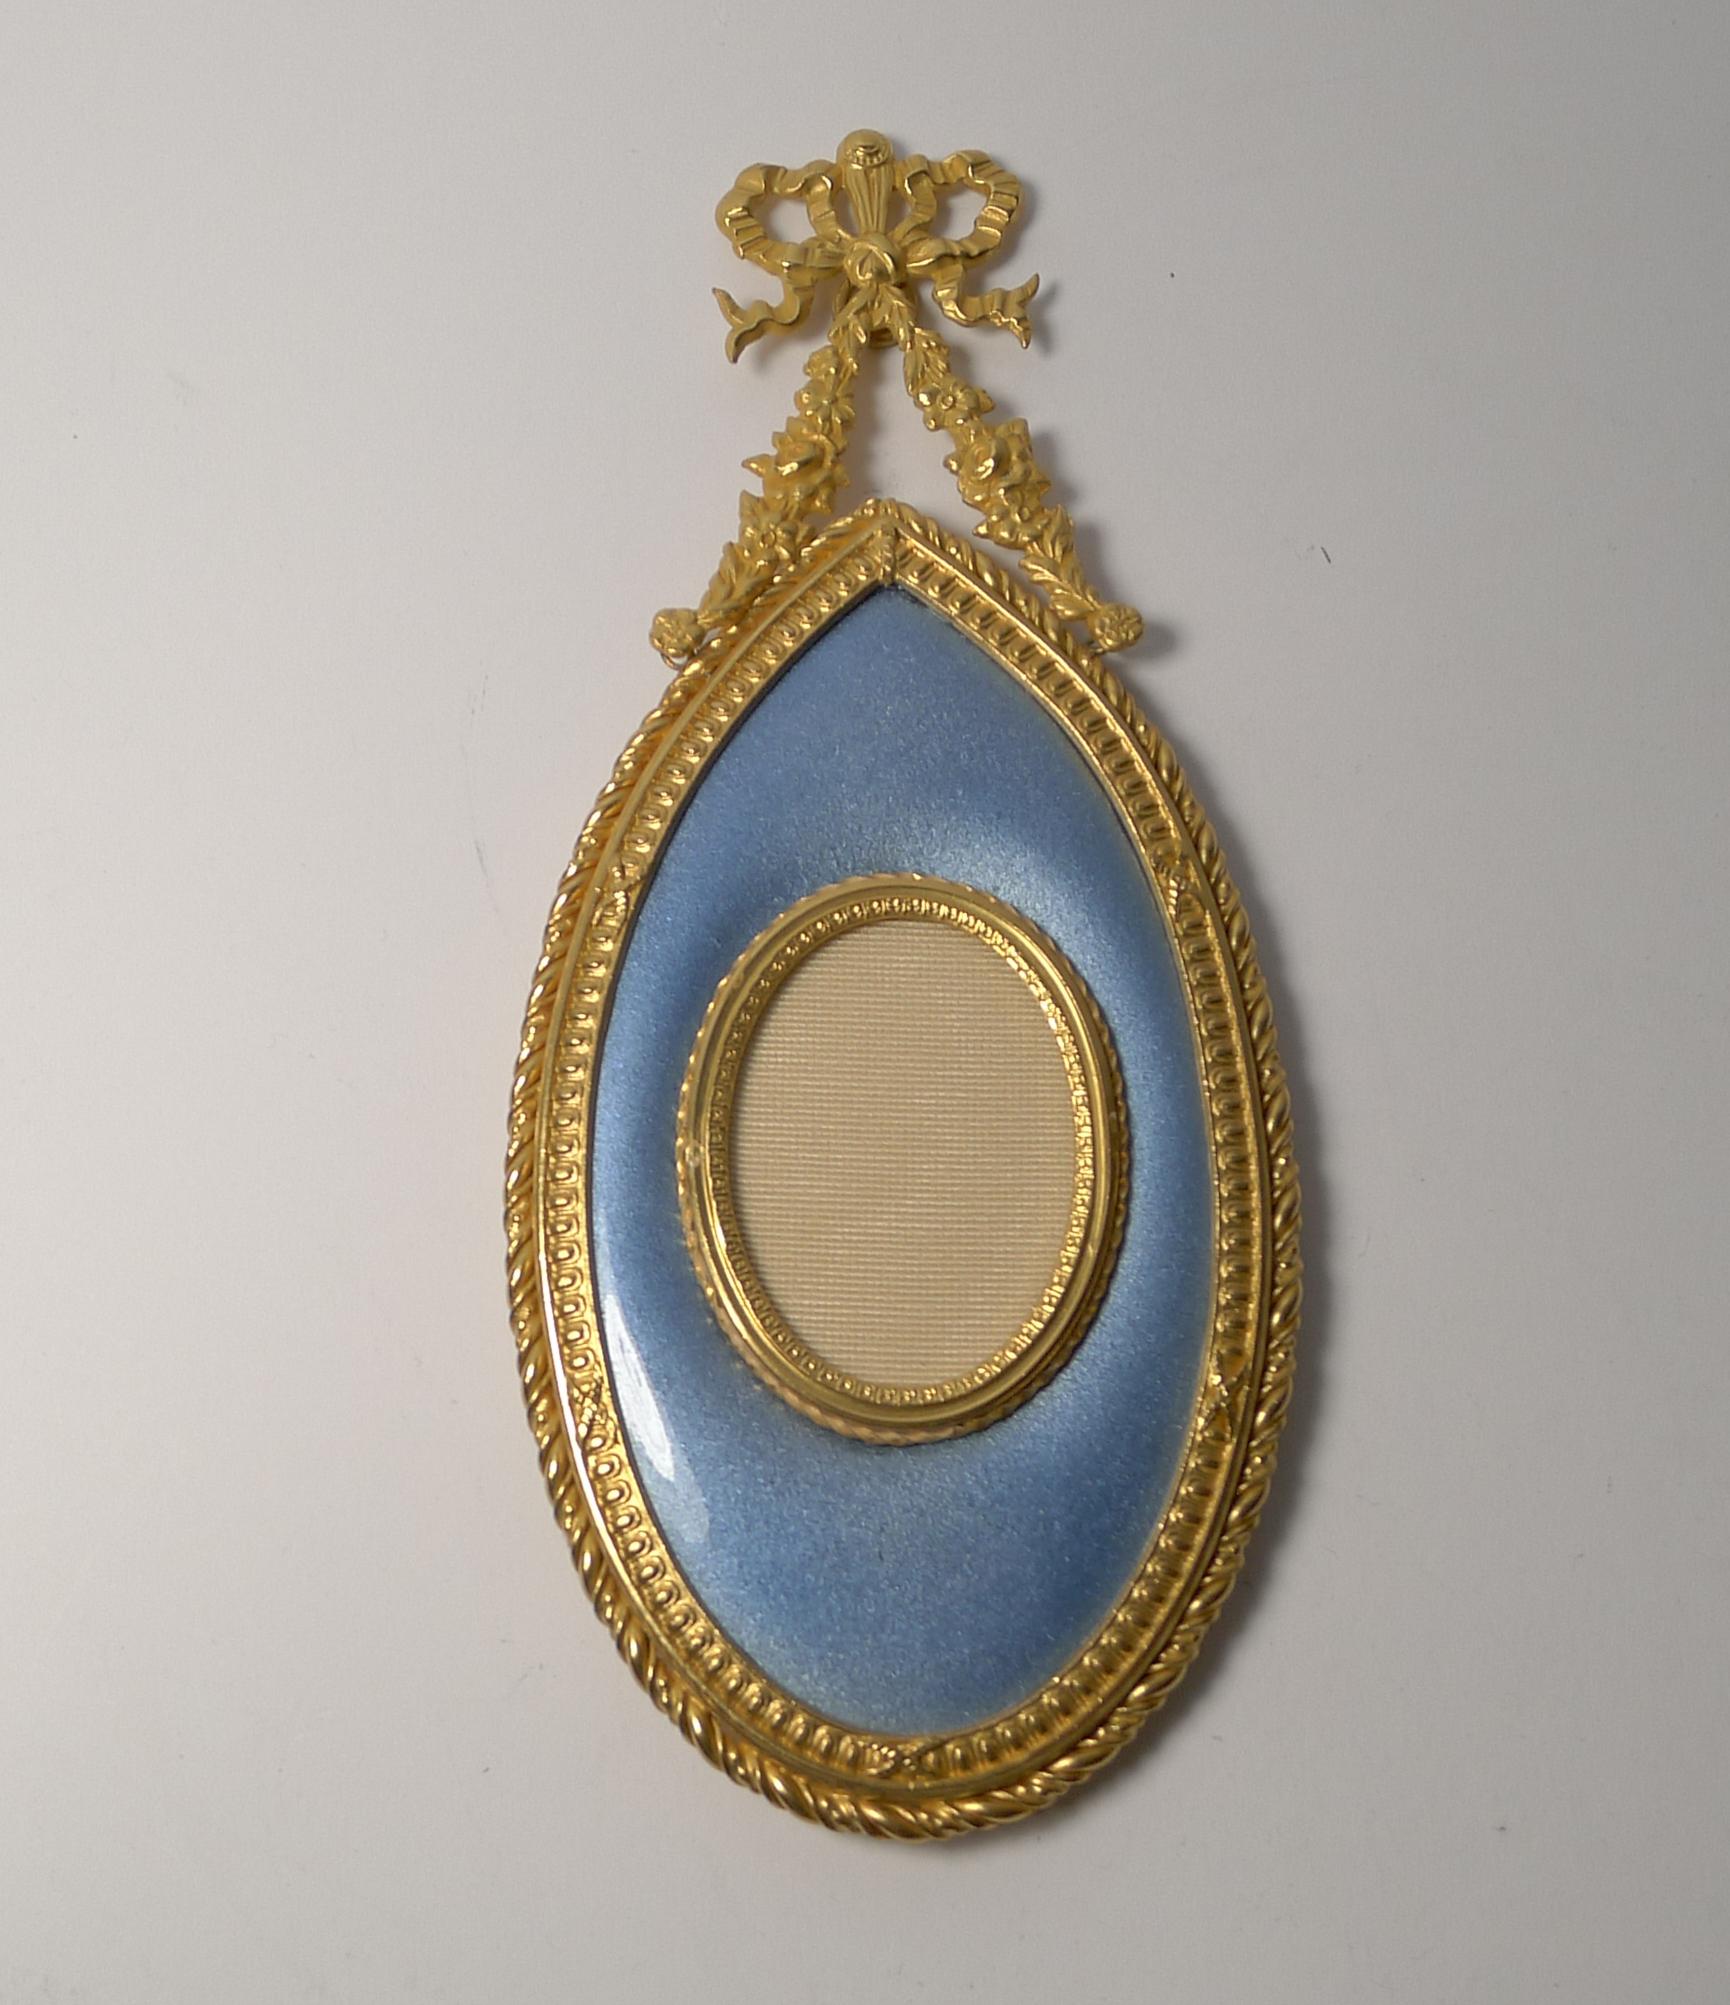 Gilt Antique French Gilded Bronze and Enamel Hanging Picture Frame, circa 1900